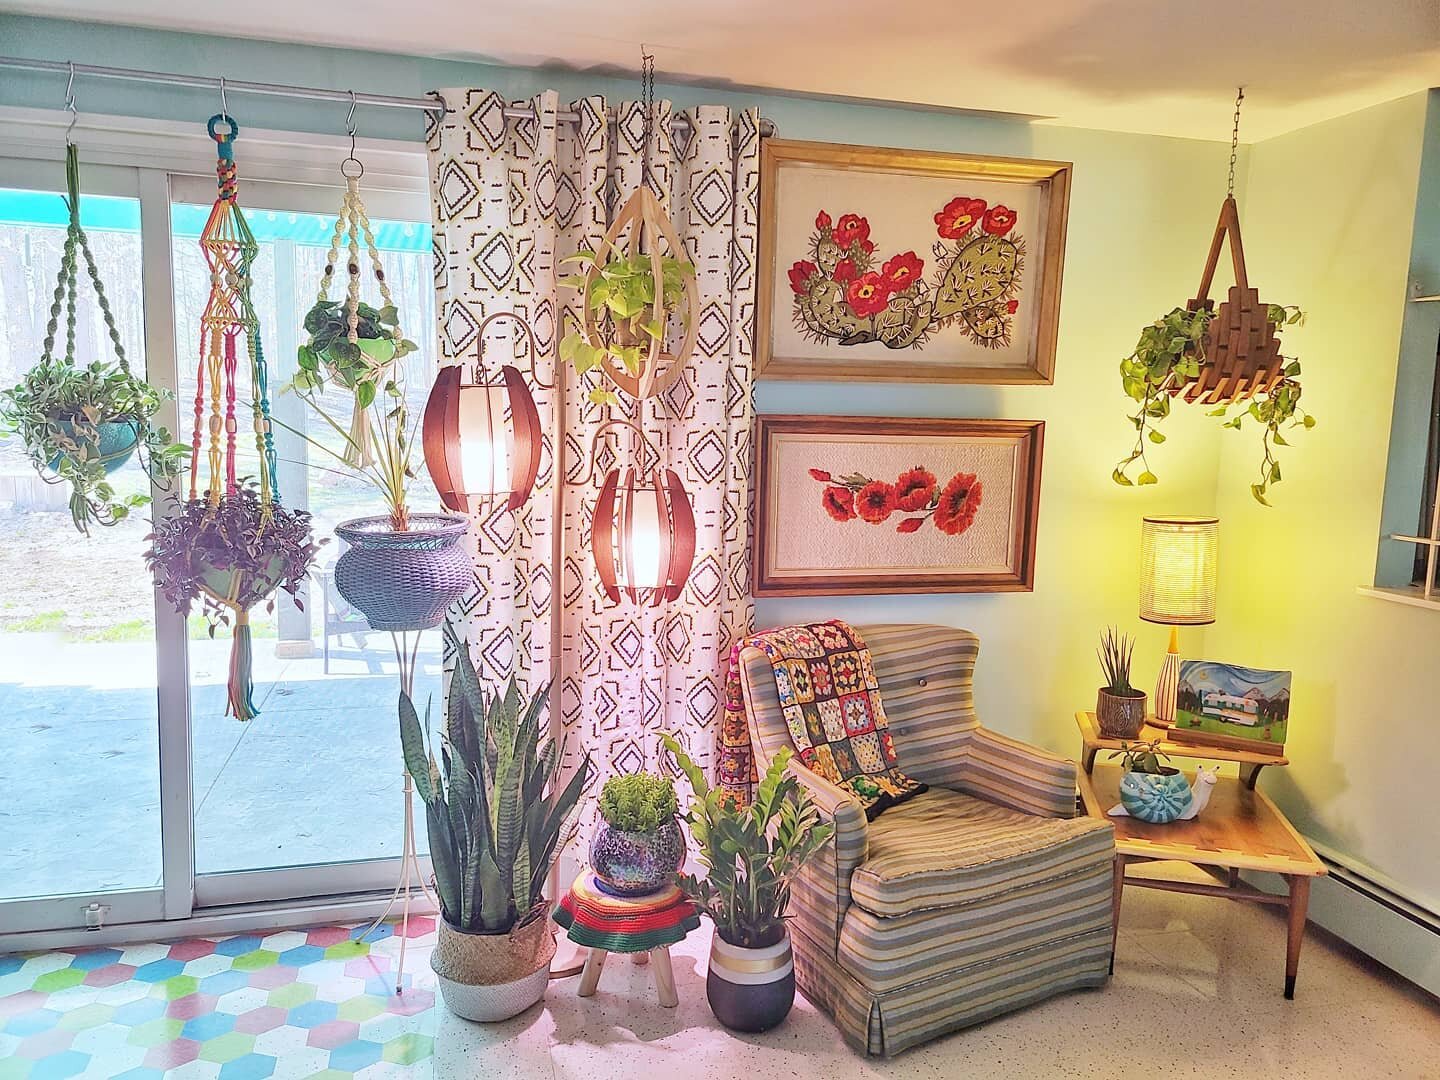 It may have been chilly today, but that extra hour of sunlight was good for my soul....and my house plants!